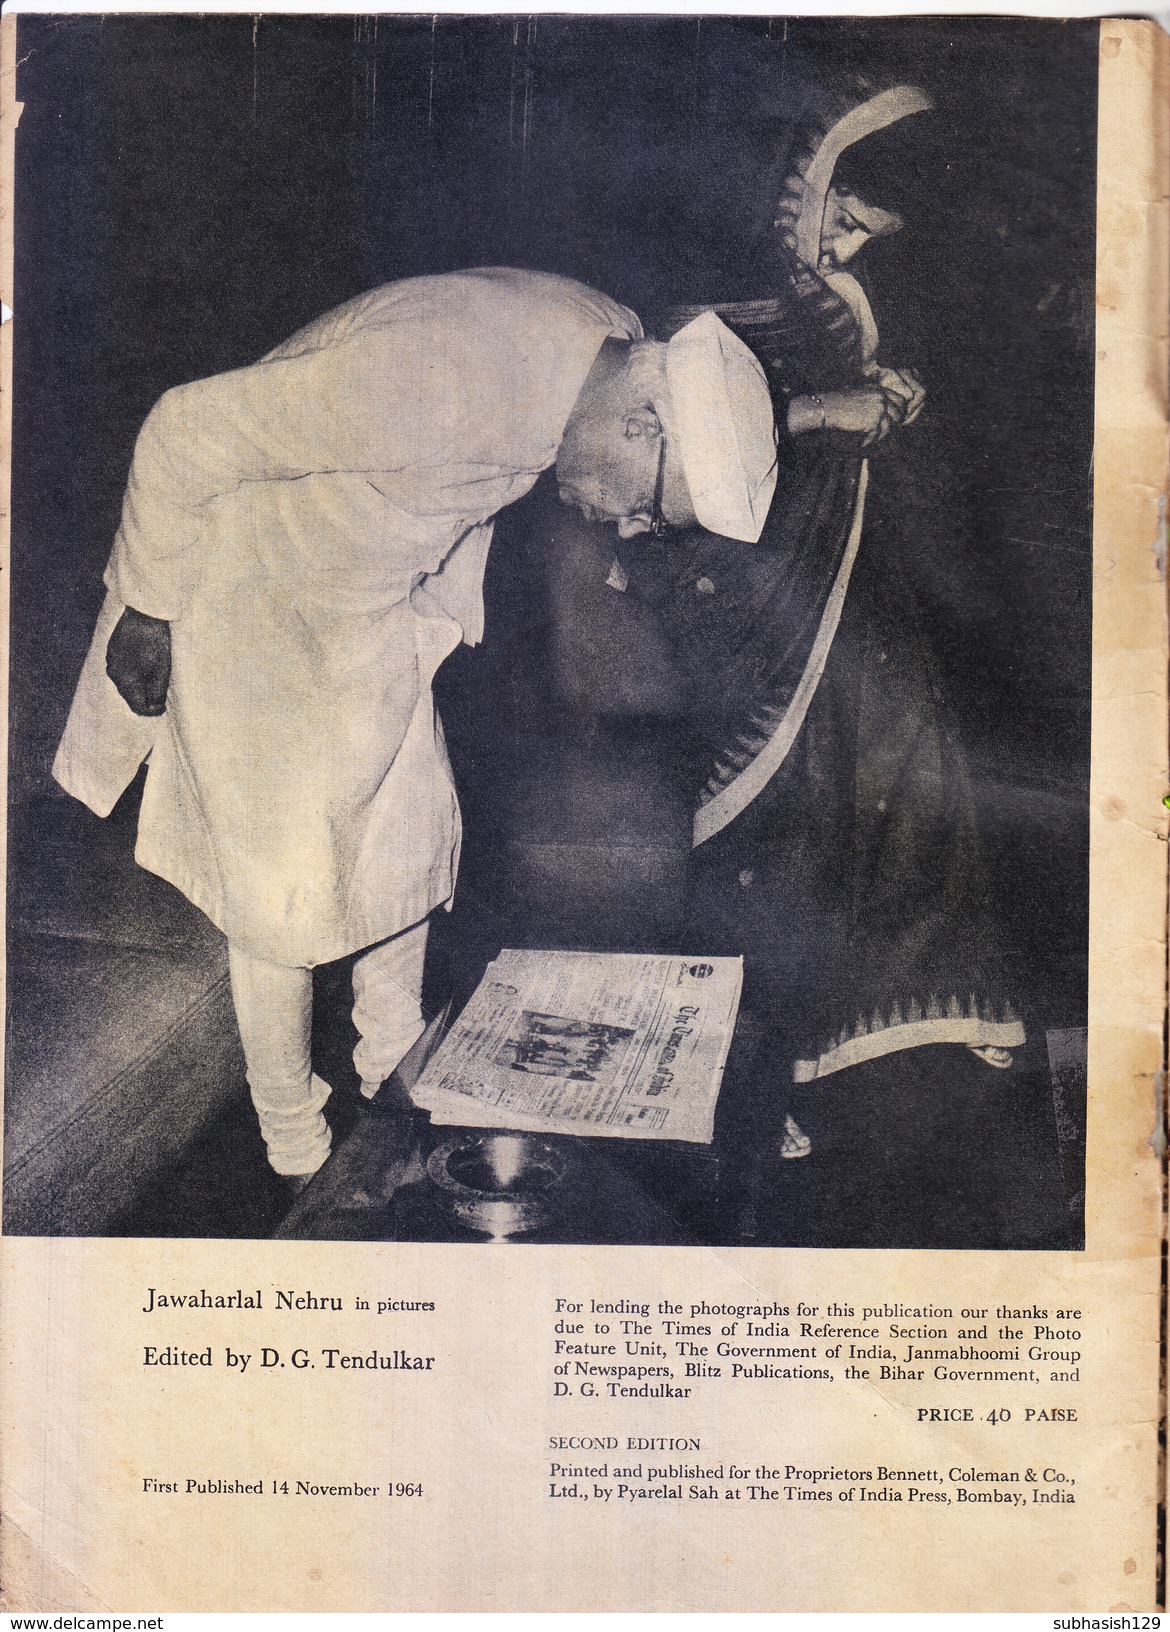 INDIA - 1964 TIMES OF INDIA SPECIAL ISSUE - JAWAHAR LAL NEHRU IN PICTURES - ORIGINAL SECOND EDITION / NOT A REPRINT - Boeken Over Verzamelen